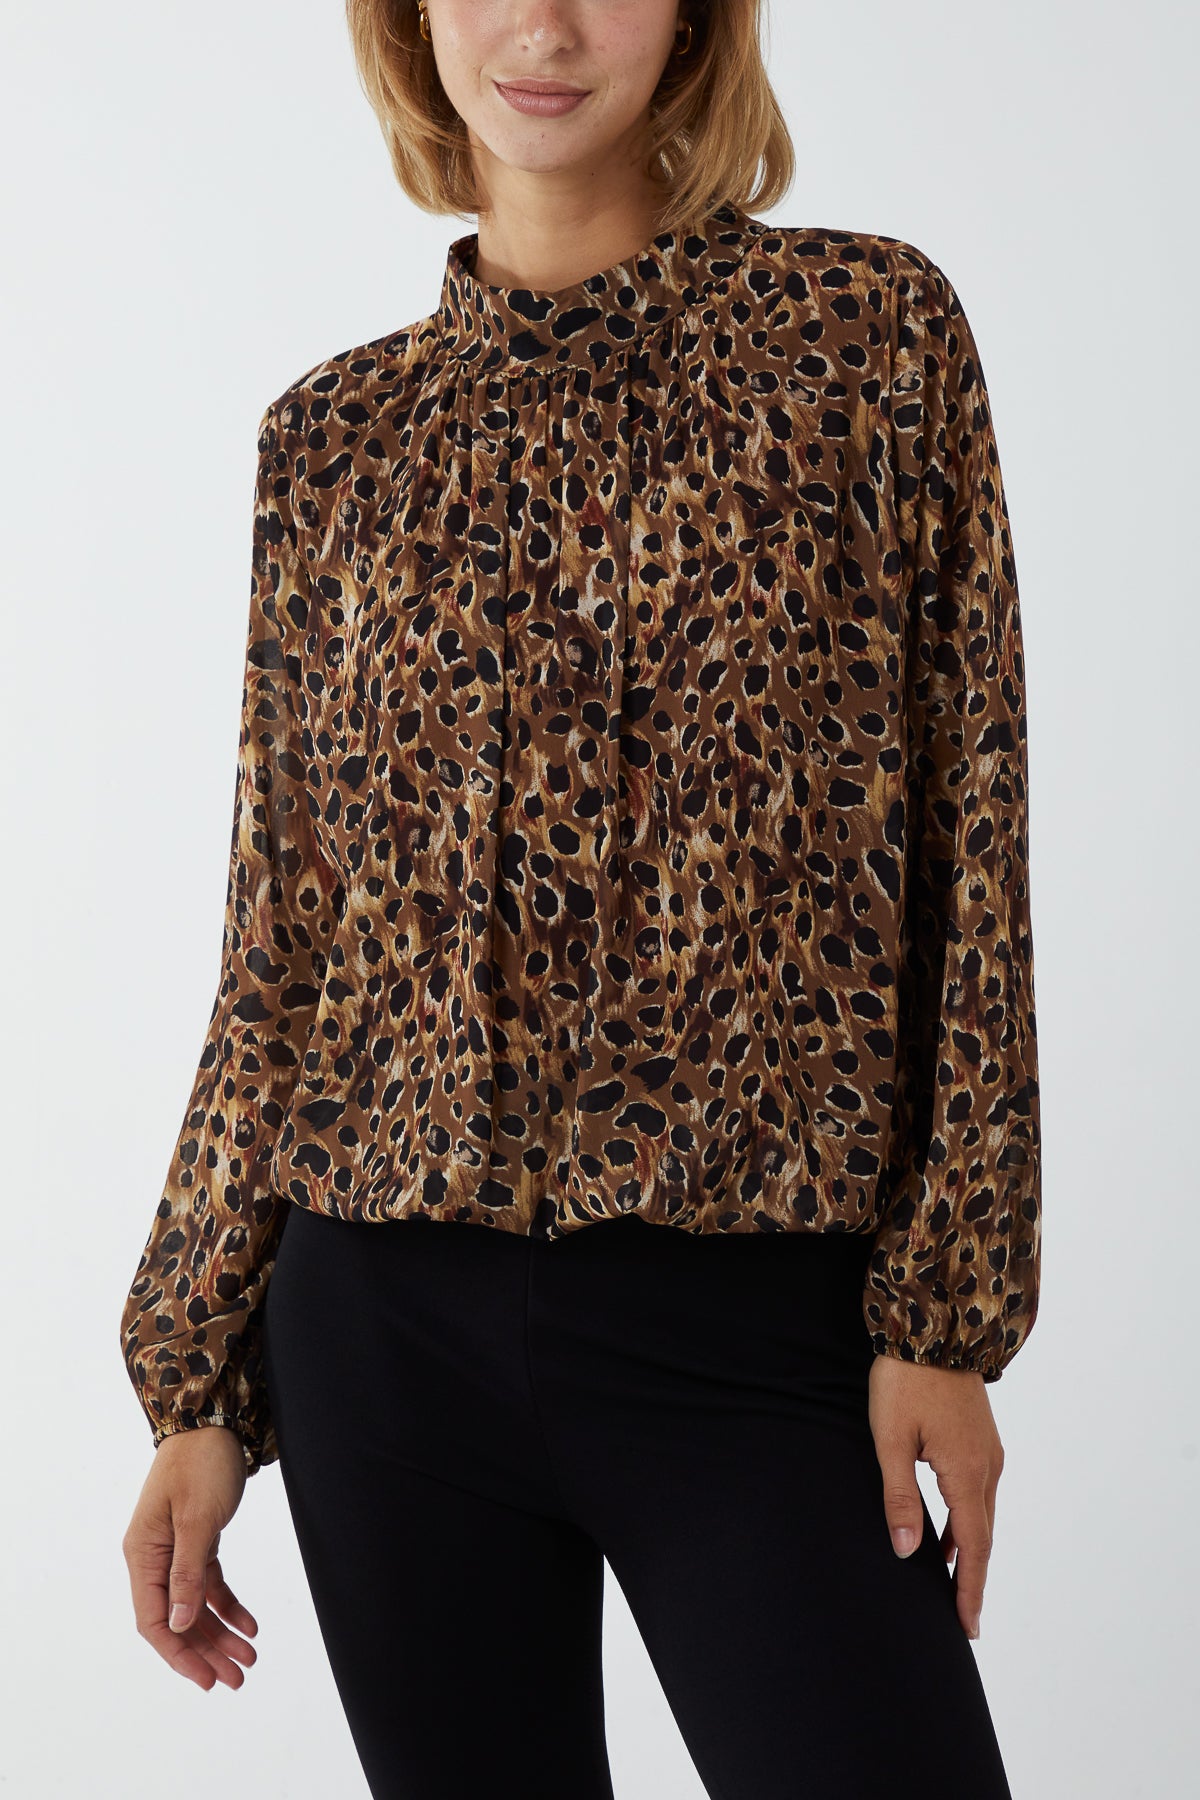 Abstract Leopard Print High Neck Blouse